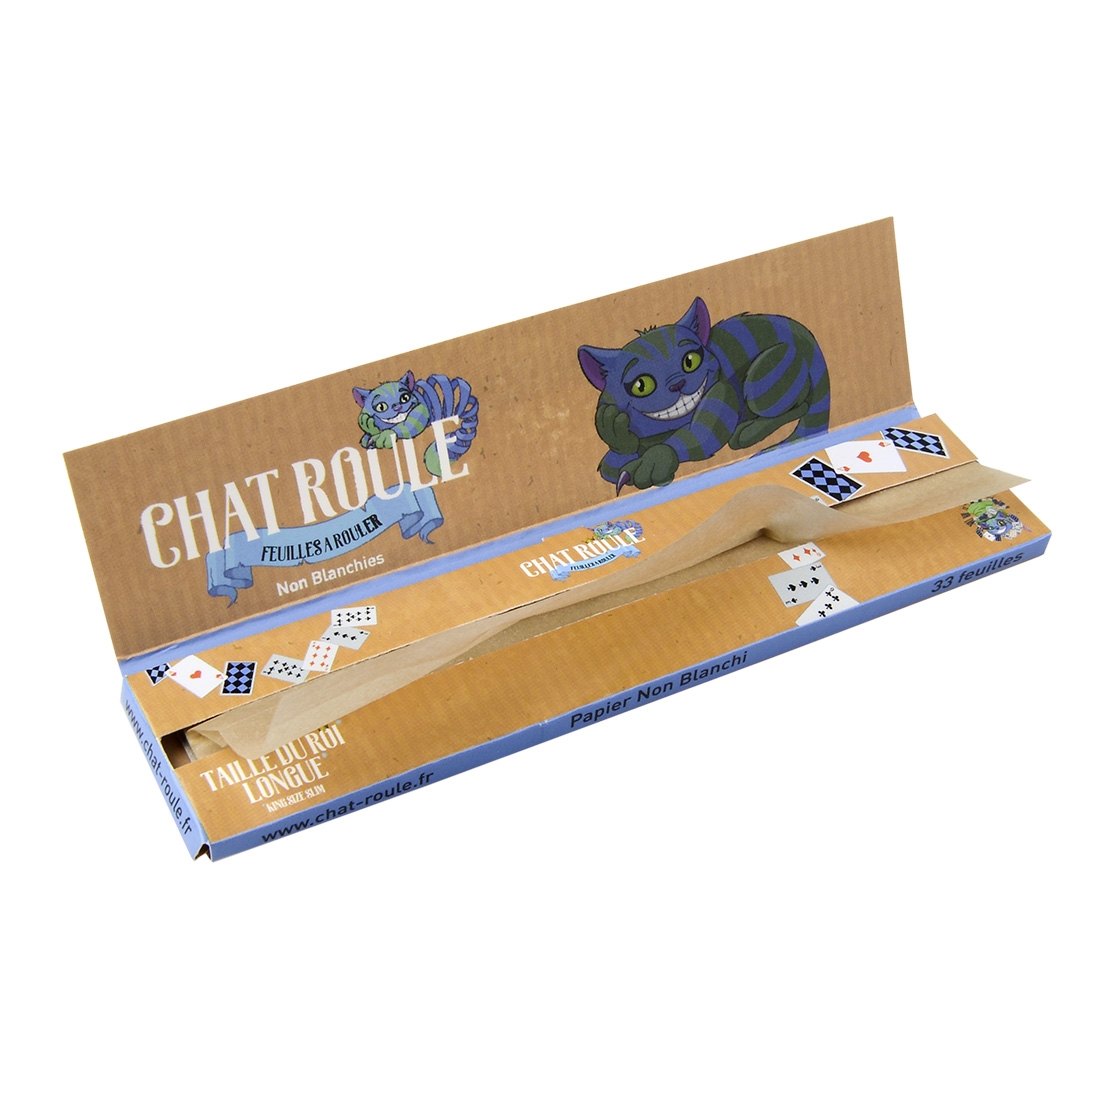 chat roule king size slim non blanchies x10